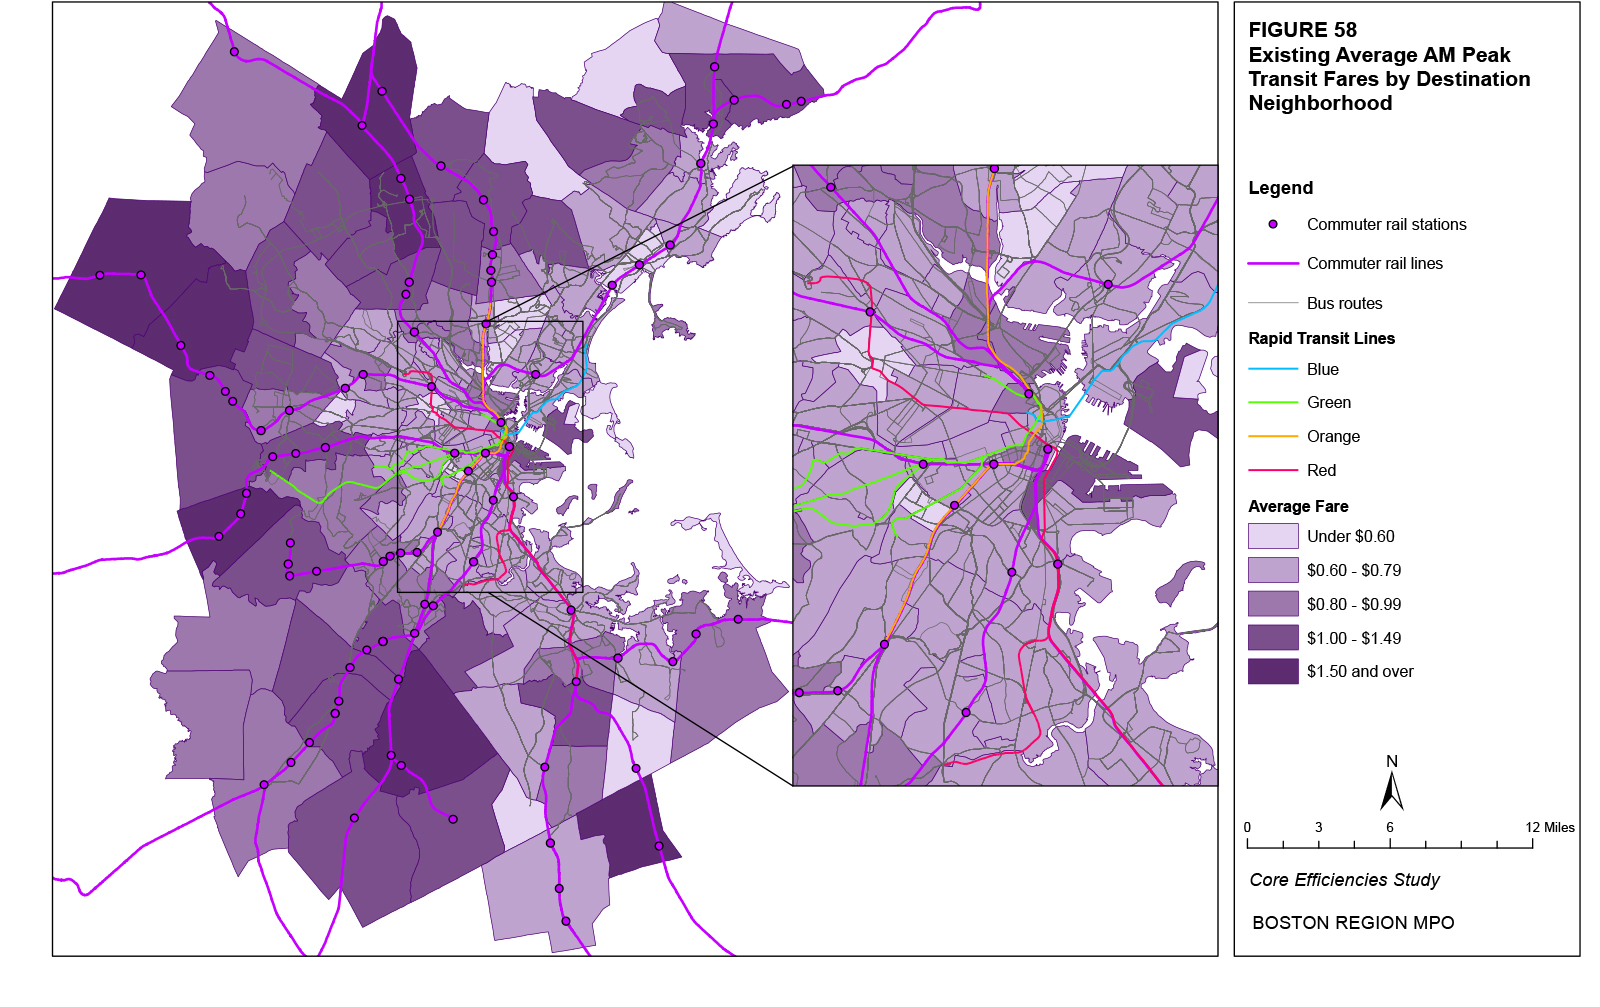 This map shows the existing average AM peak transit fares for destination trips by neighborhood.